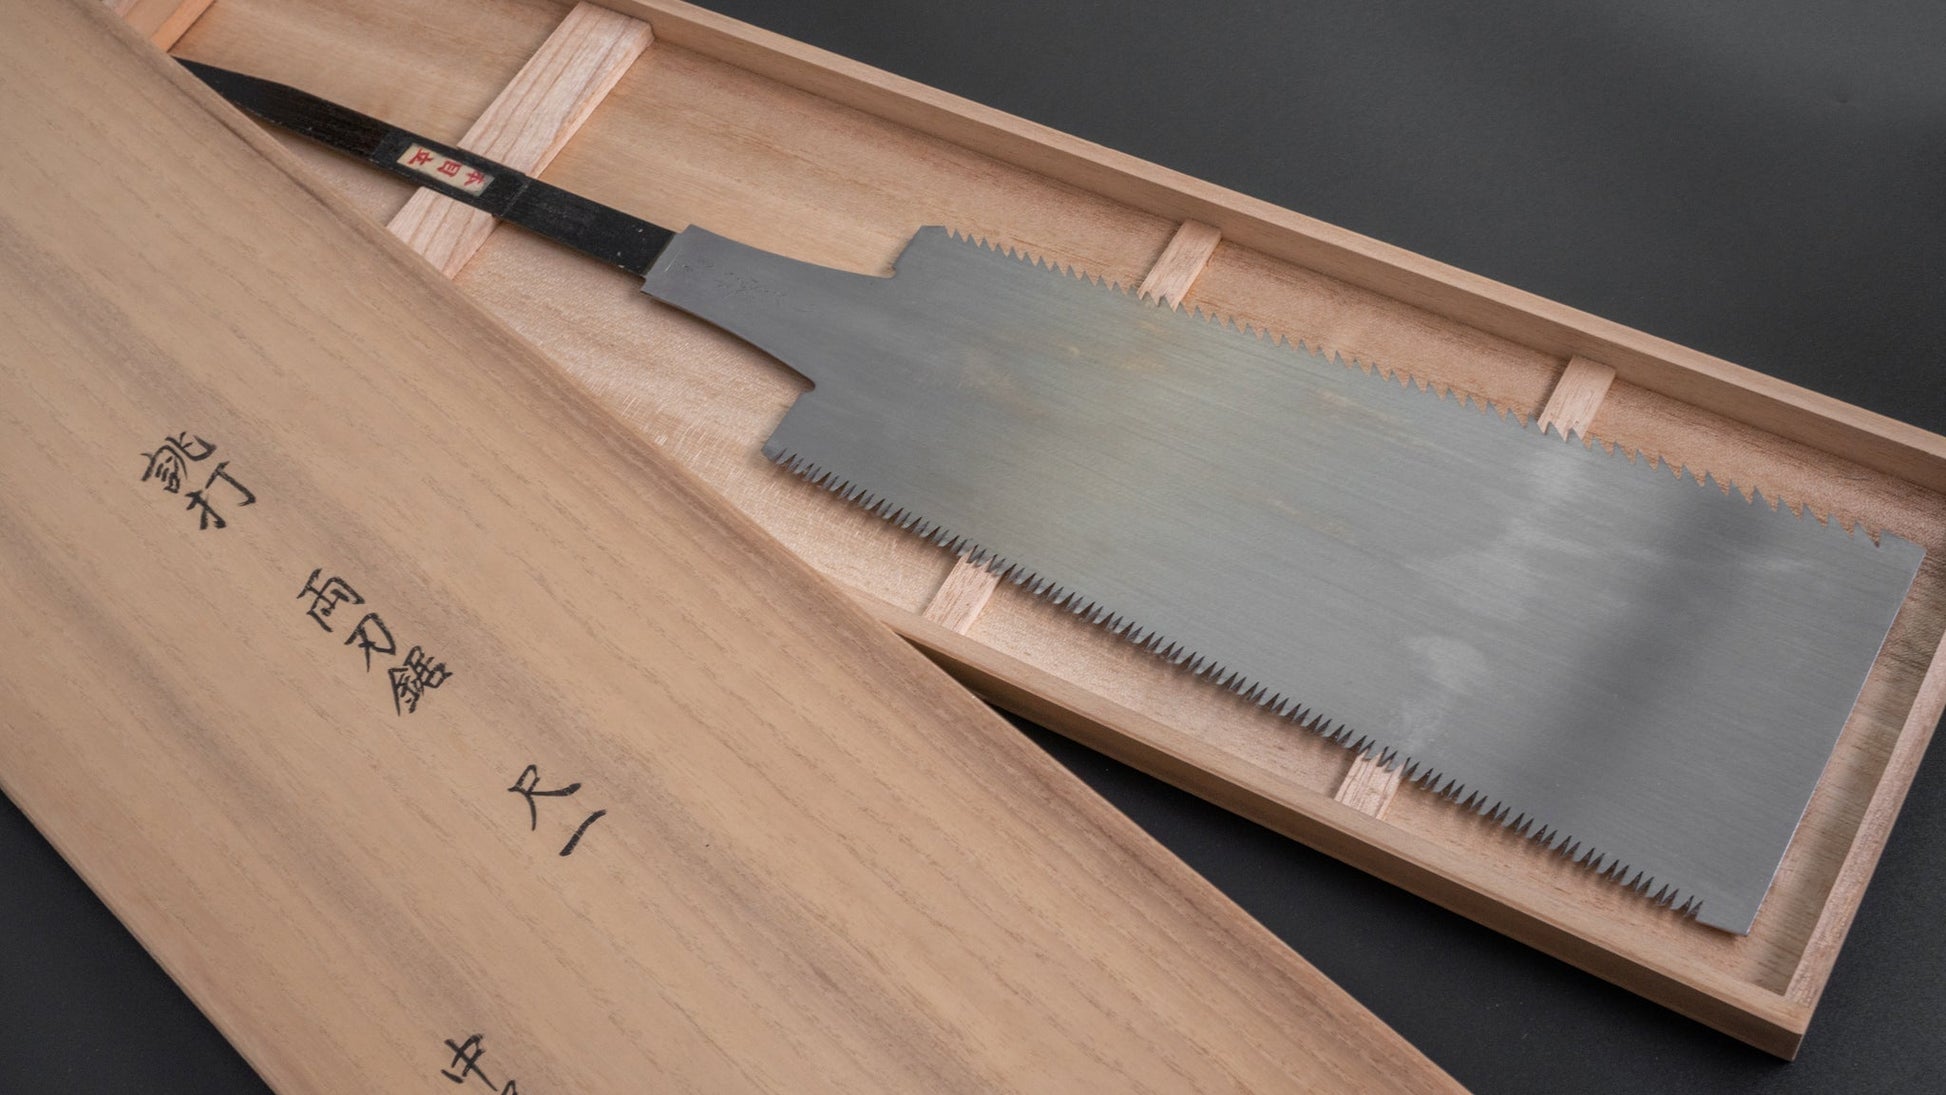 Morihei Vintage Go Double Bladed Saw 300mm (Limited) - HITOHIRA